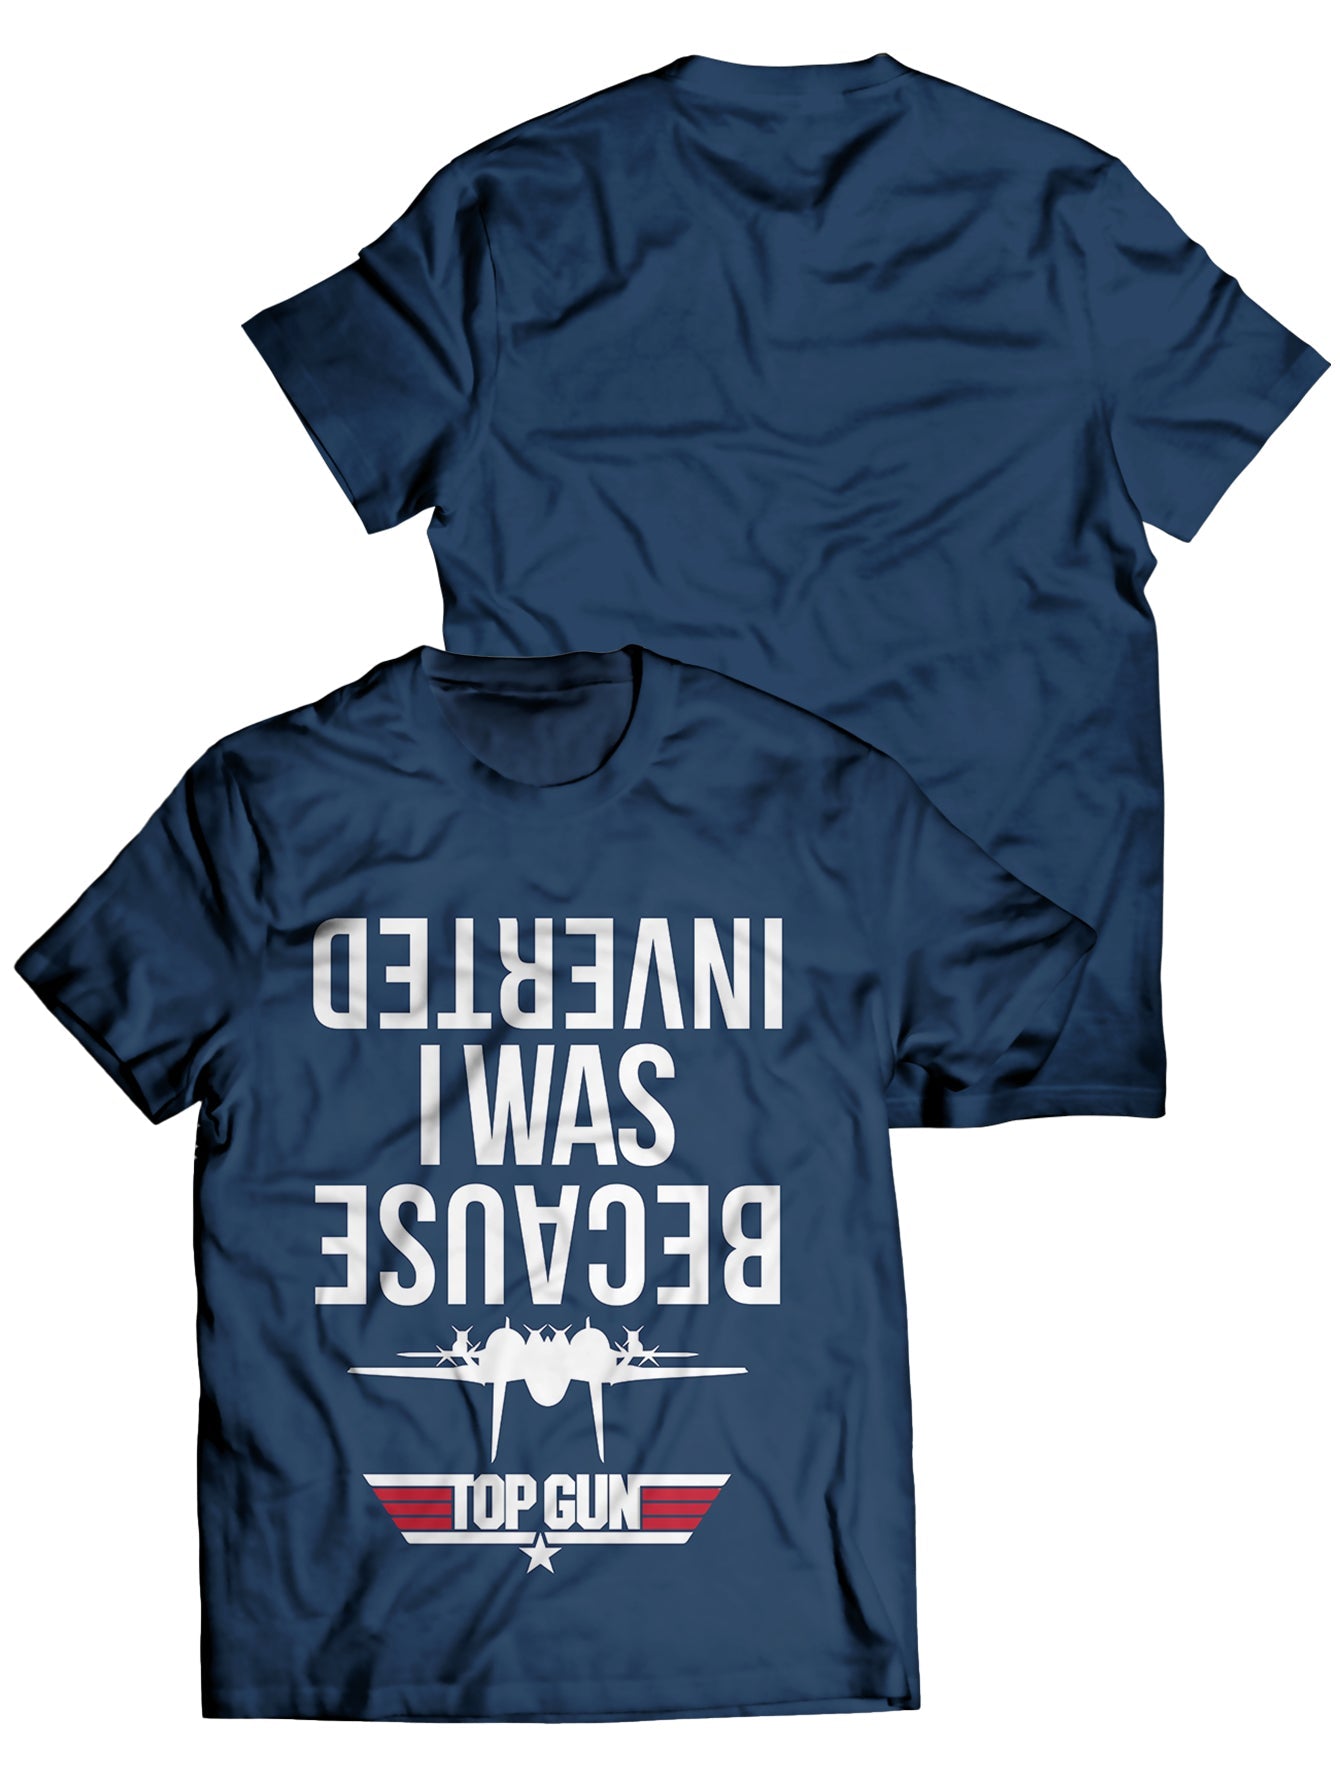 Fandomaniax - Because I Was Inverted Unisex T-Shirt